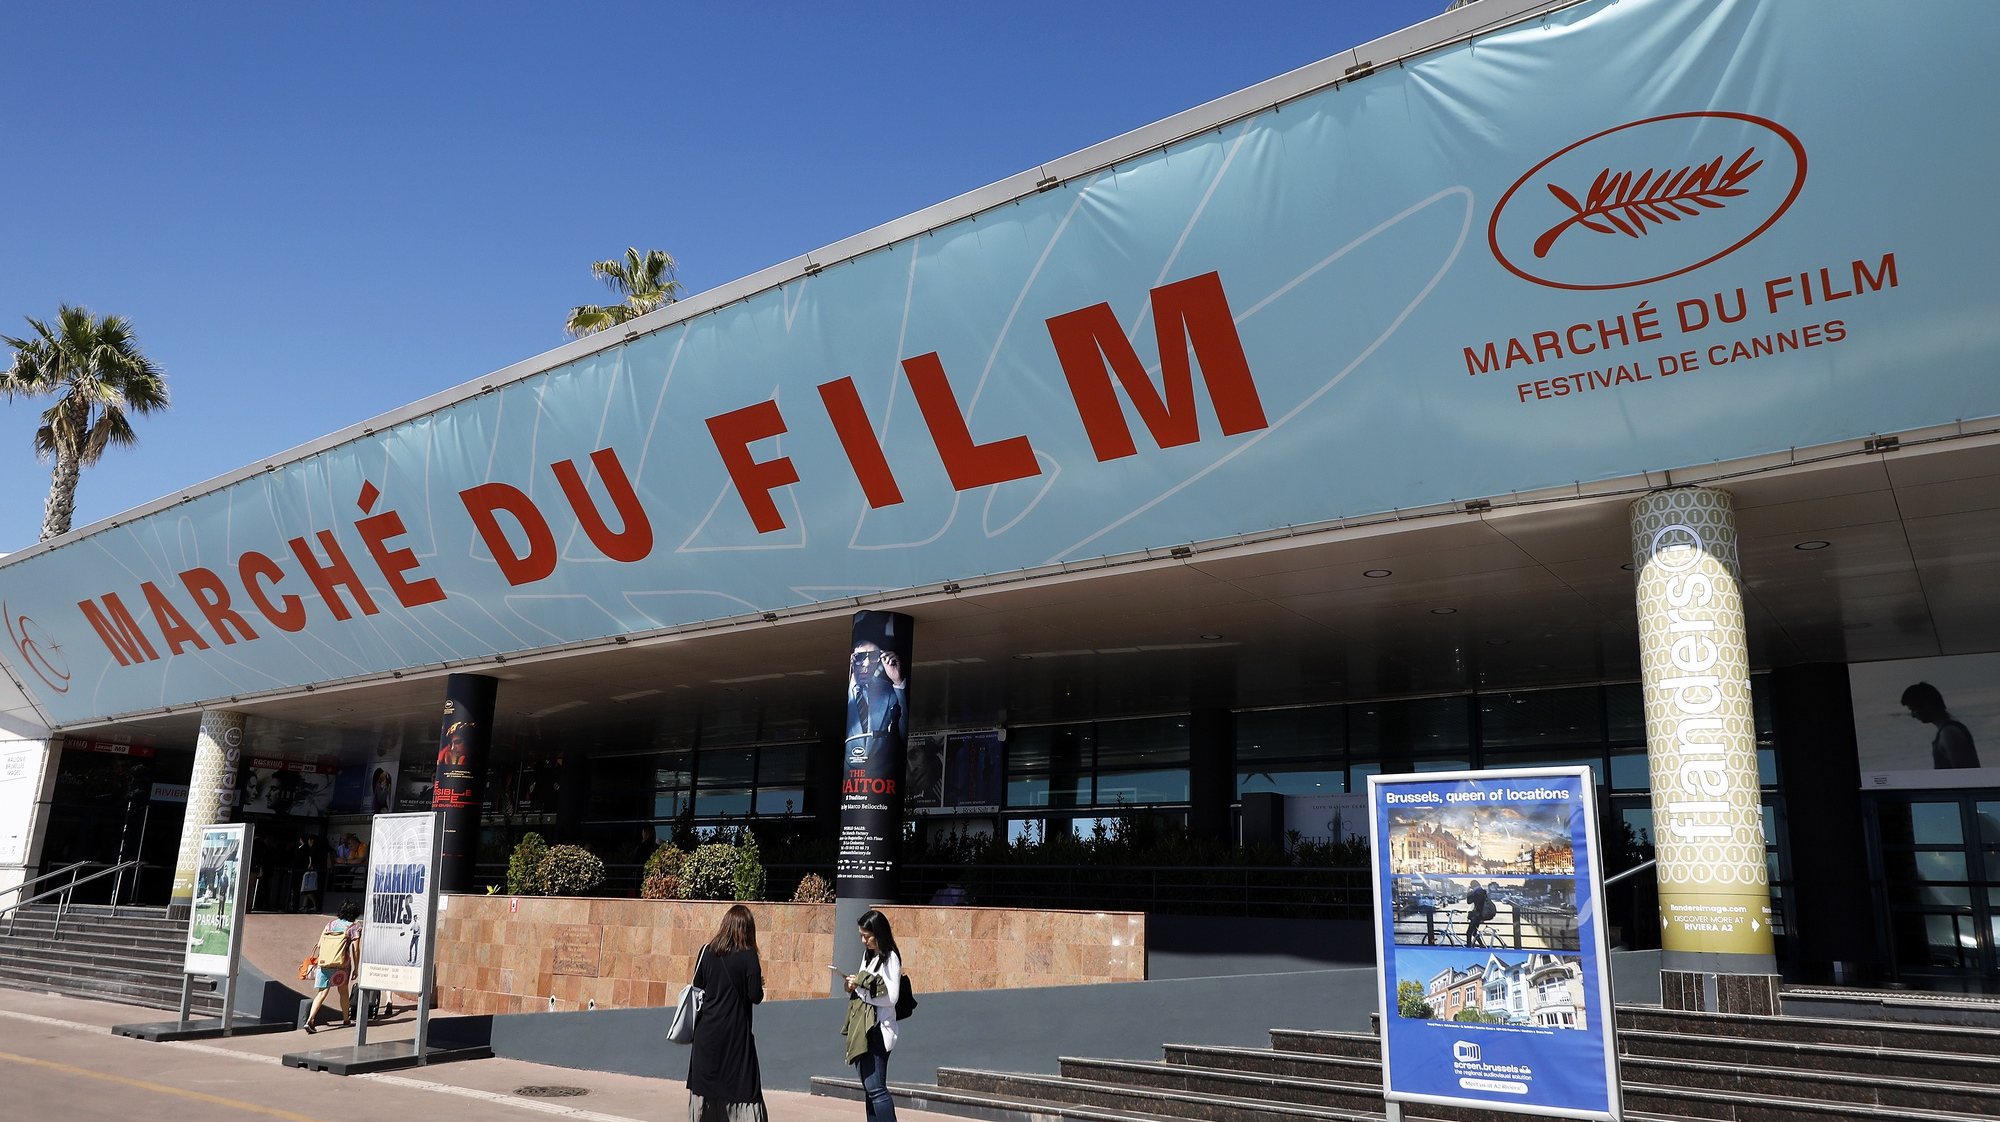 epa08369474 (FILE) - A general view of the Film Market area during the 72nd annual Cannes Film Festival, in Cannes, France, 14 May 2019 (reissued 17 April 2020). The Festival de Cannes announced the launch of the Marche du Film Online, an online market created to support the international film industry and help professionals. It will be held from 22 to 26 June 2020.  EPA/SEBASTIEN NOGIER *** Local Caption *** 55191039